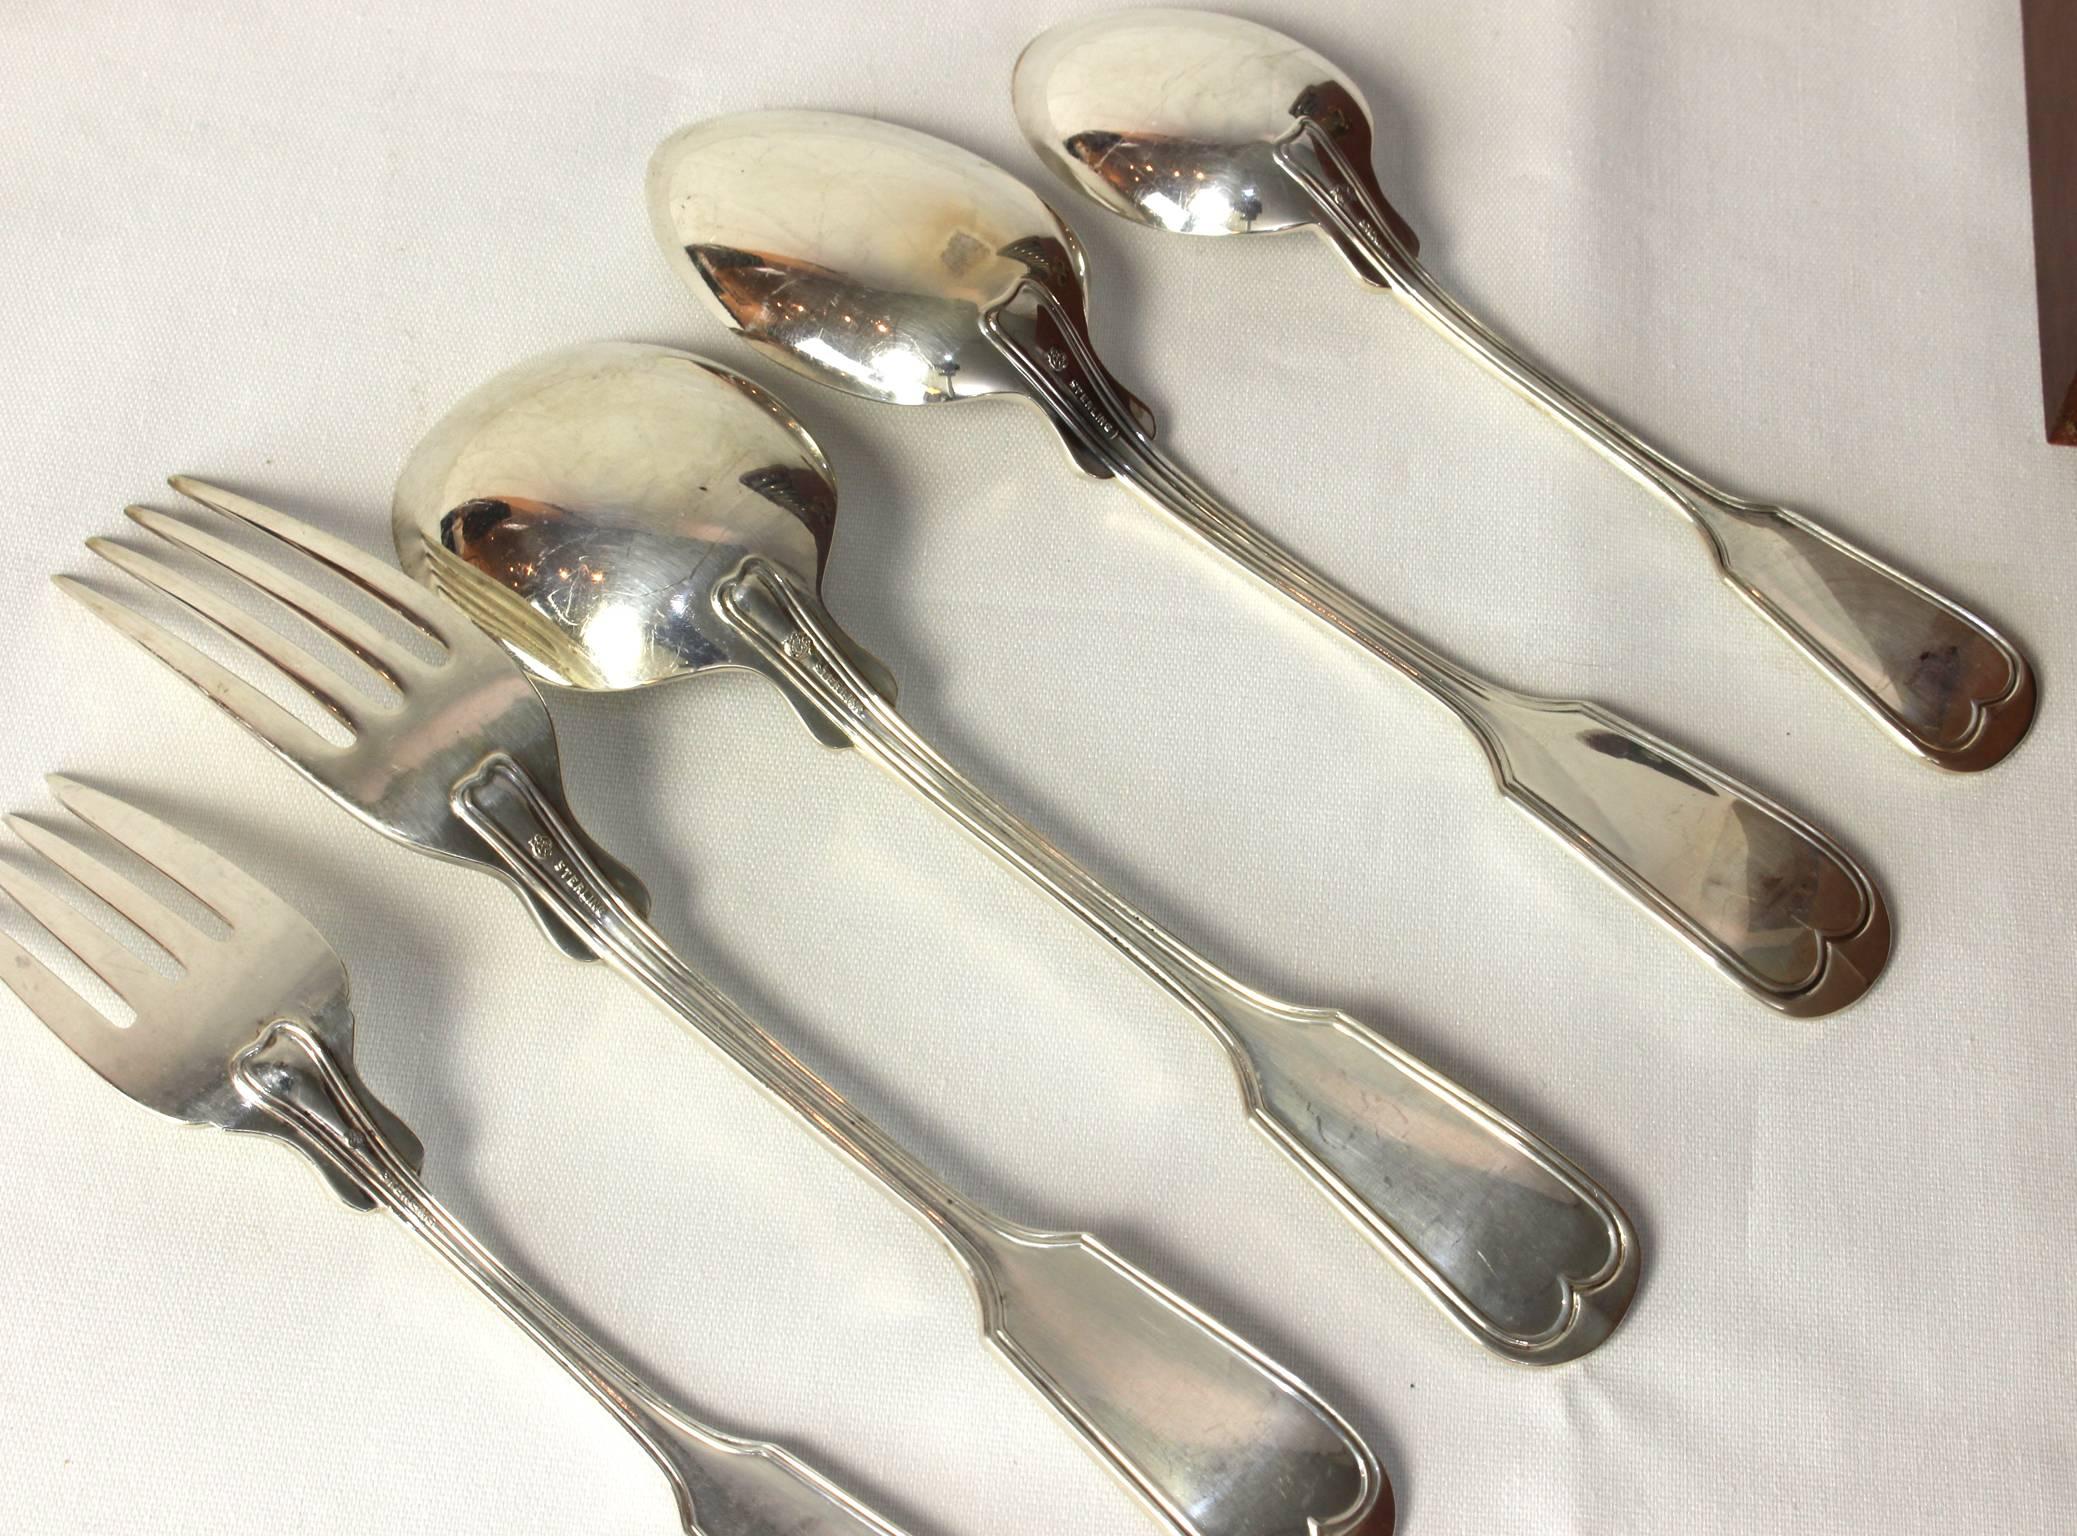 Large Set of Sterling Fiddle and Thread Flatware 1